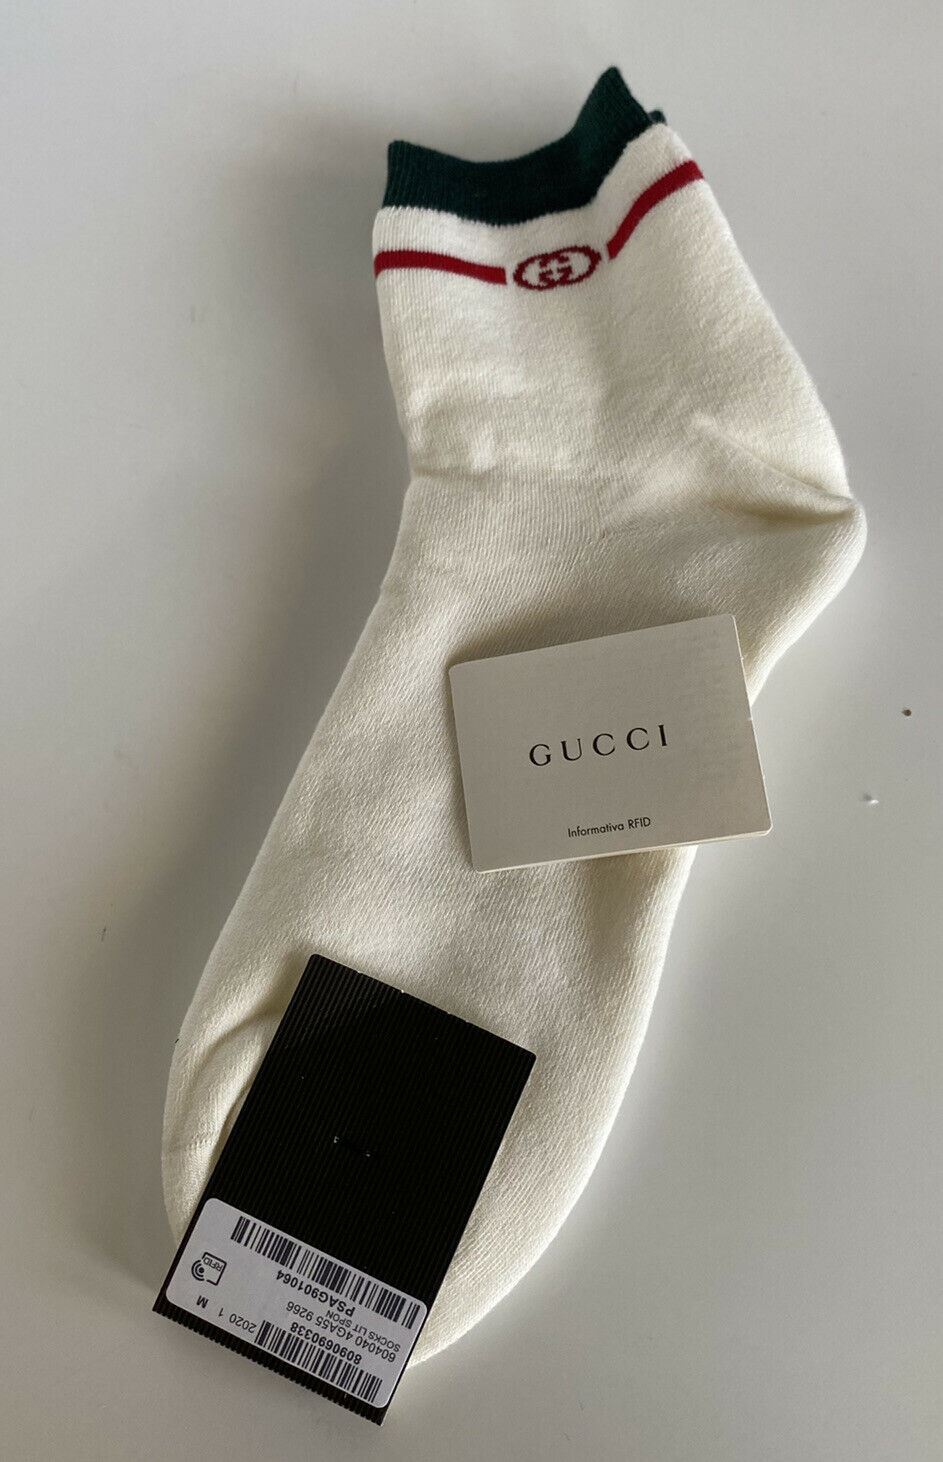 NWT Gucci Lit Spon White/Green/Red Socks M-L (24-26 cm) Made in Italy 604040